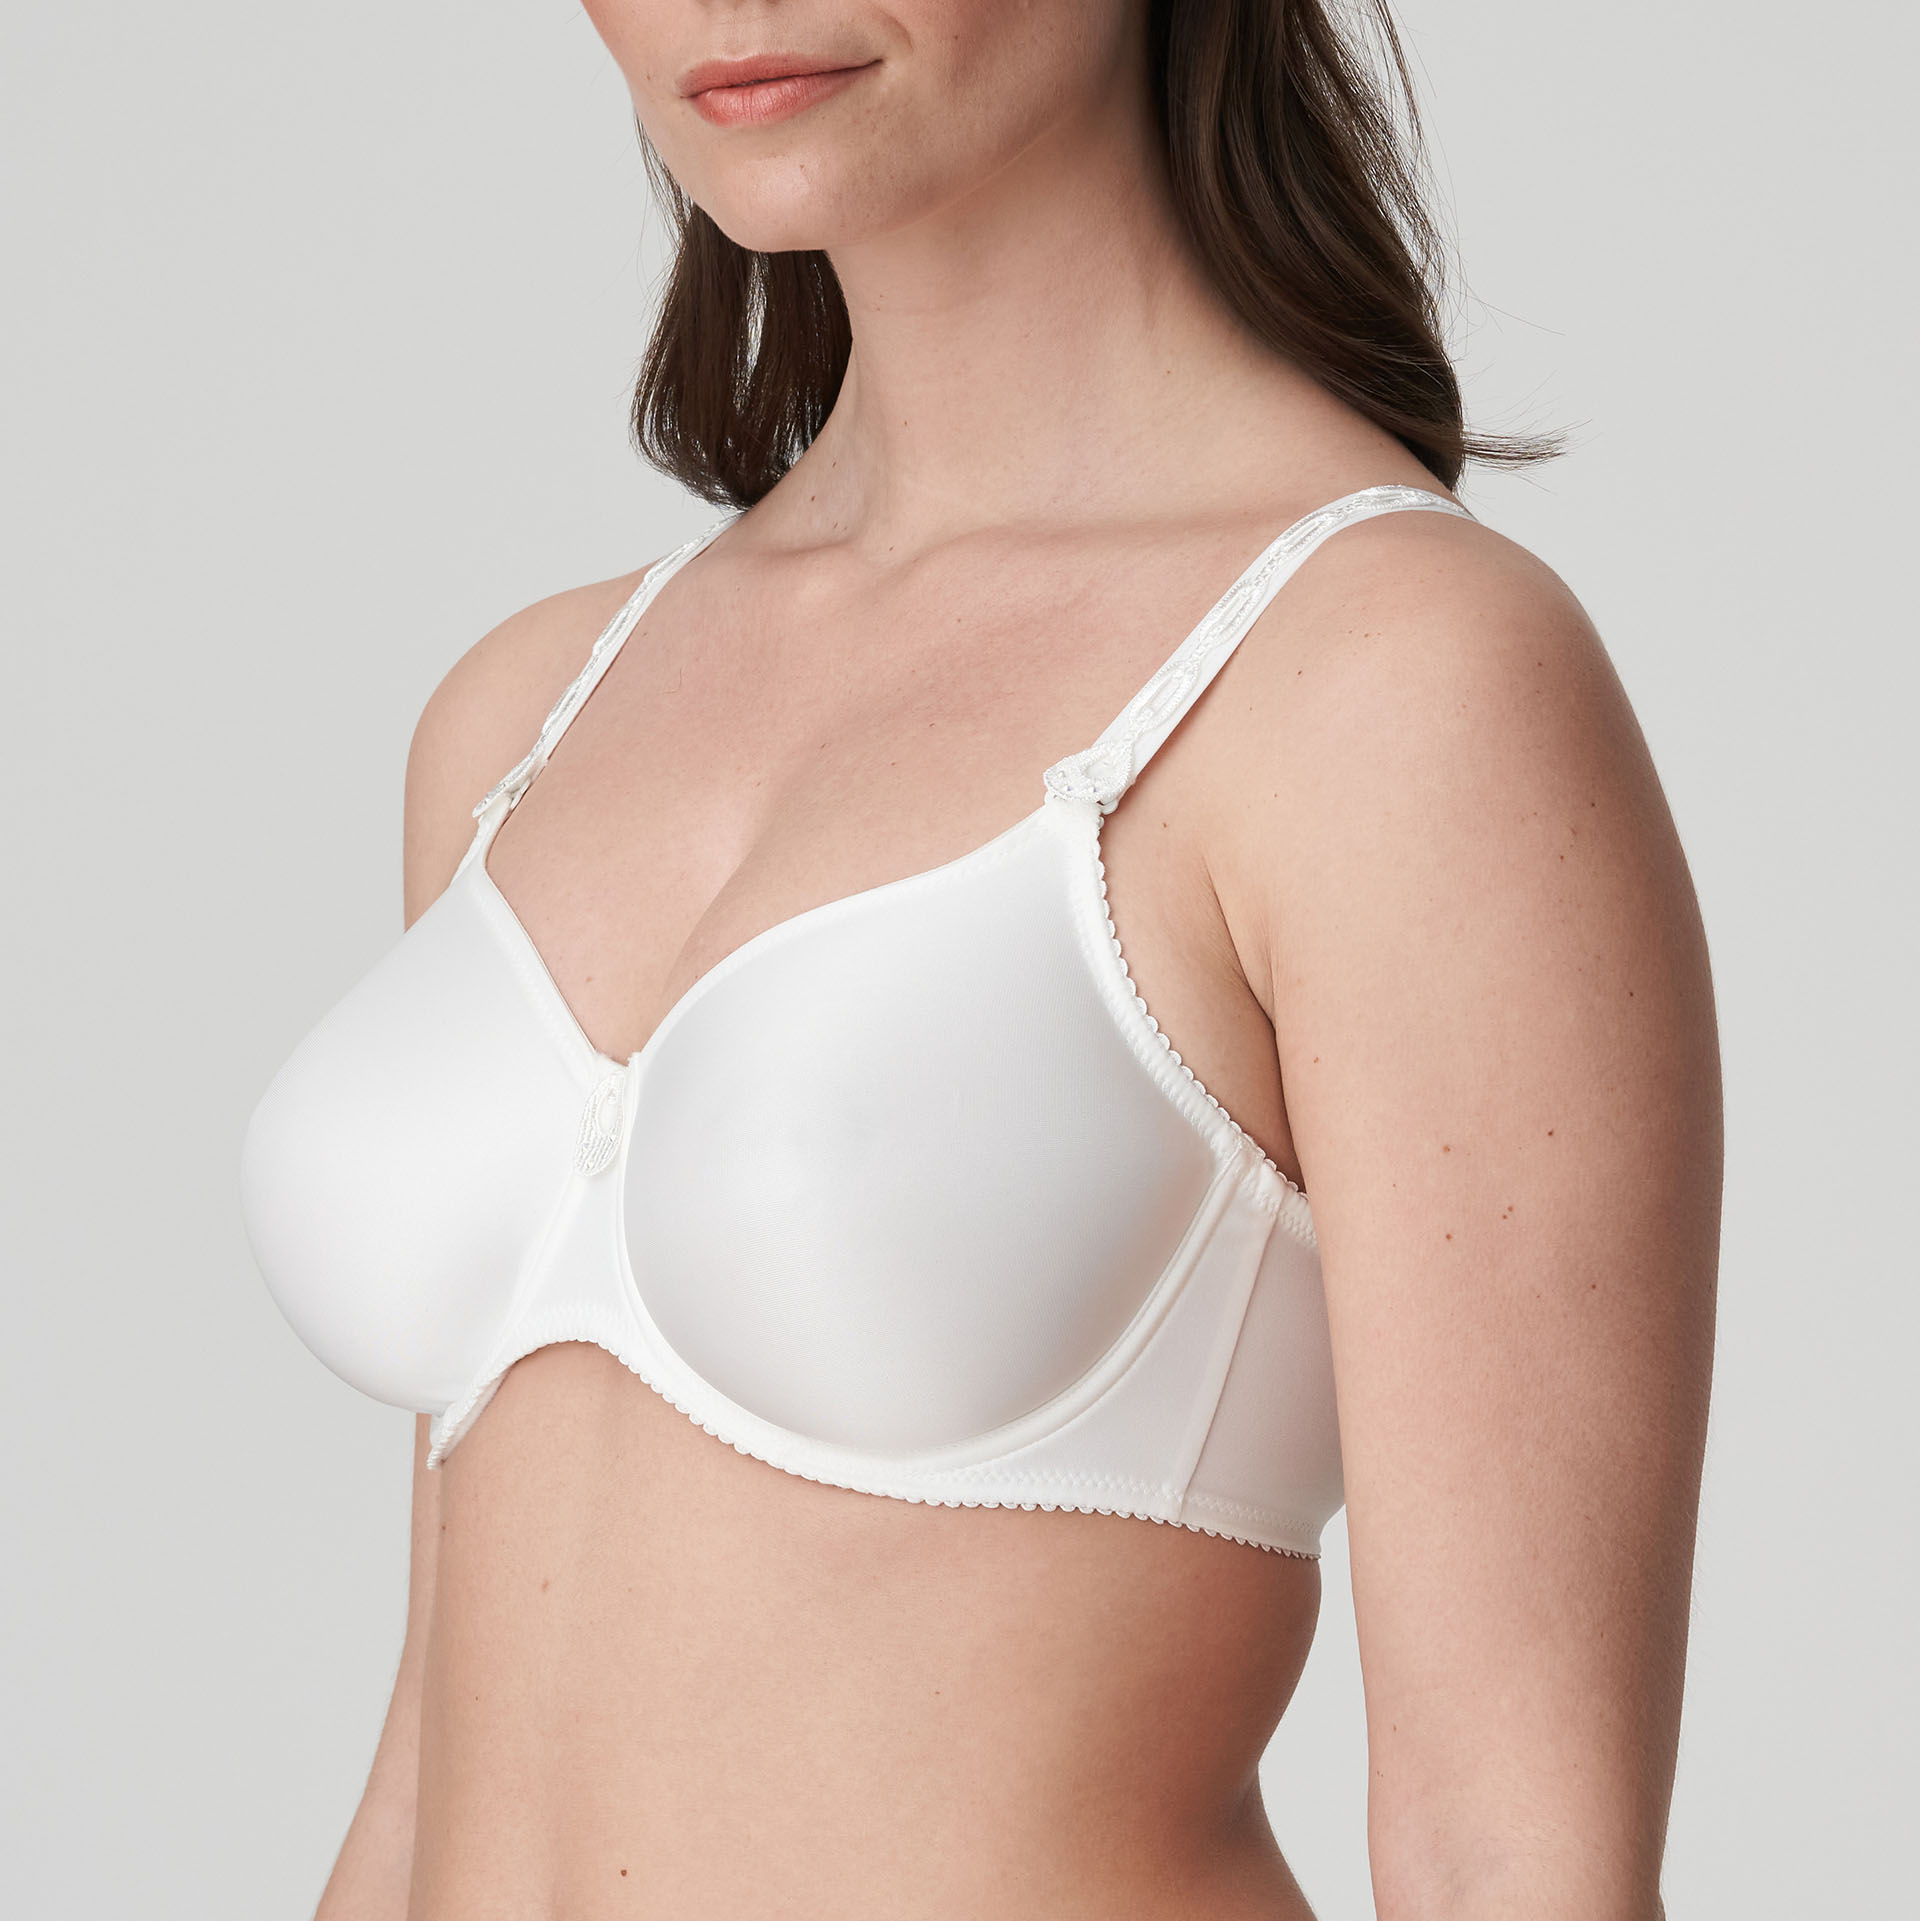 Satin by PrimaDonna bandeau bra with smooth and shaping underwire